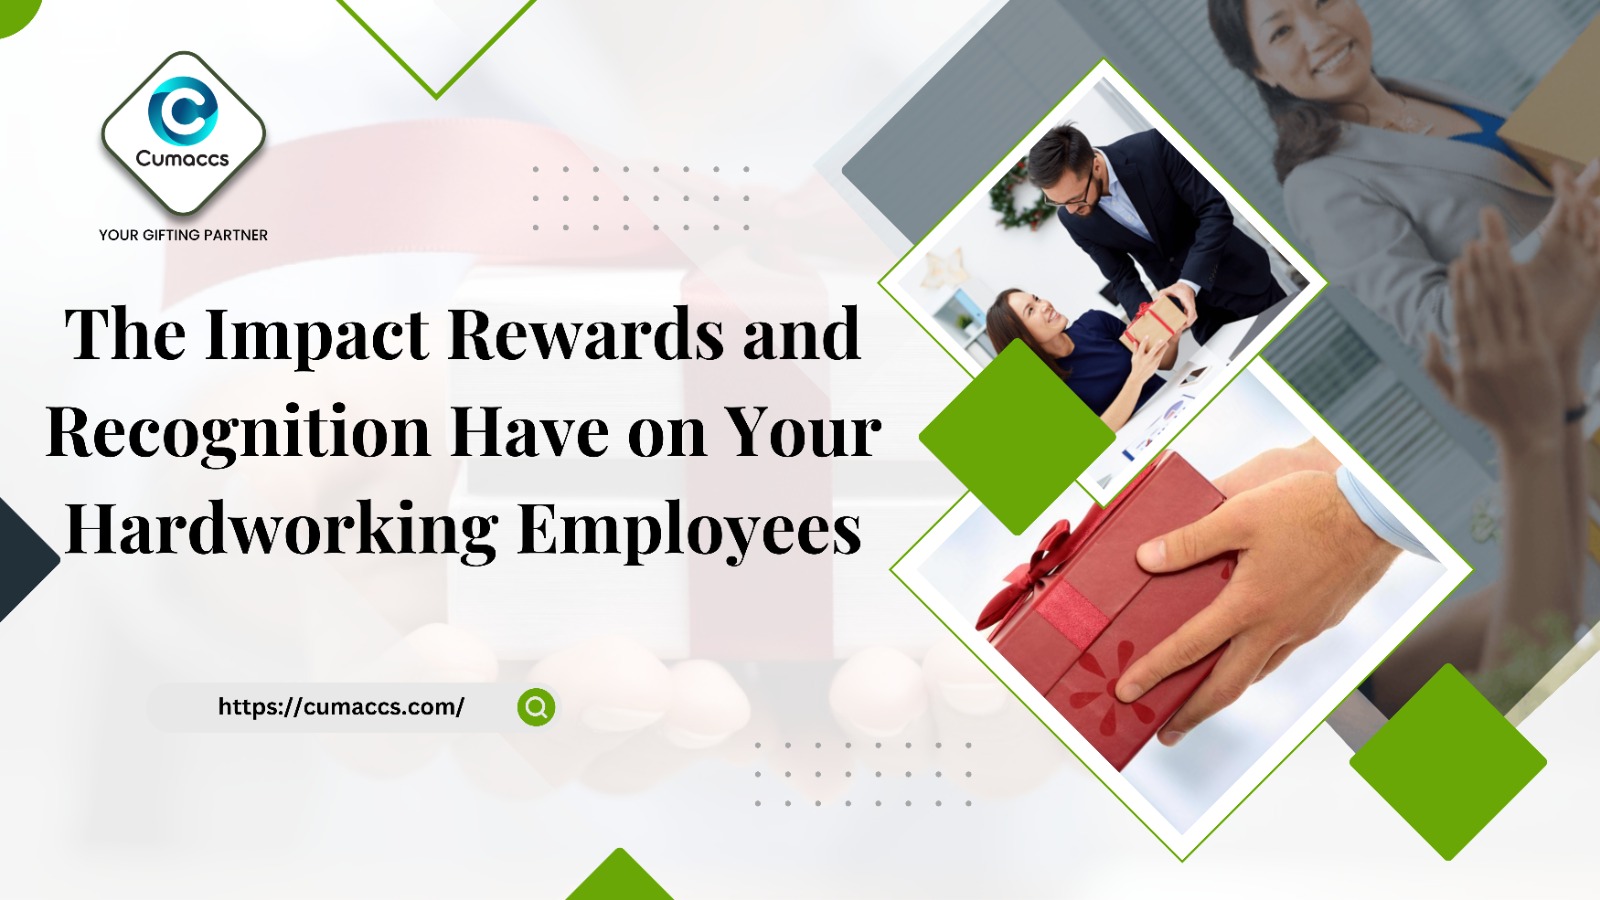 The Impact Rewards and Recognition Have on Your Hardworking Employees